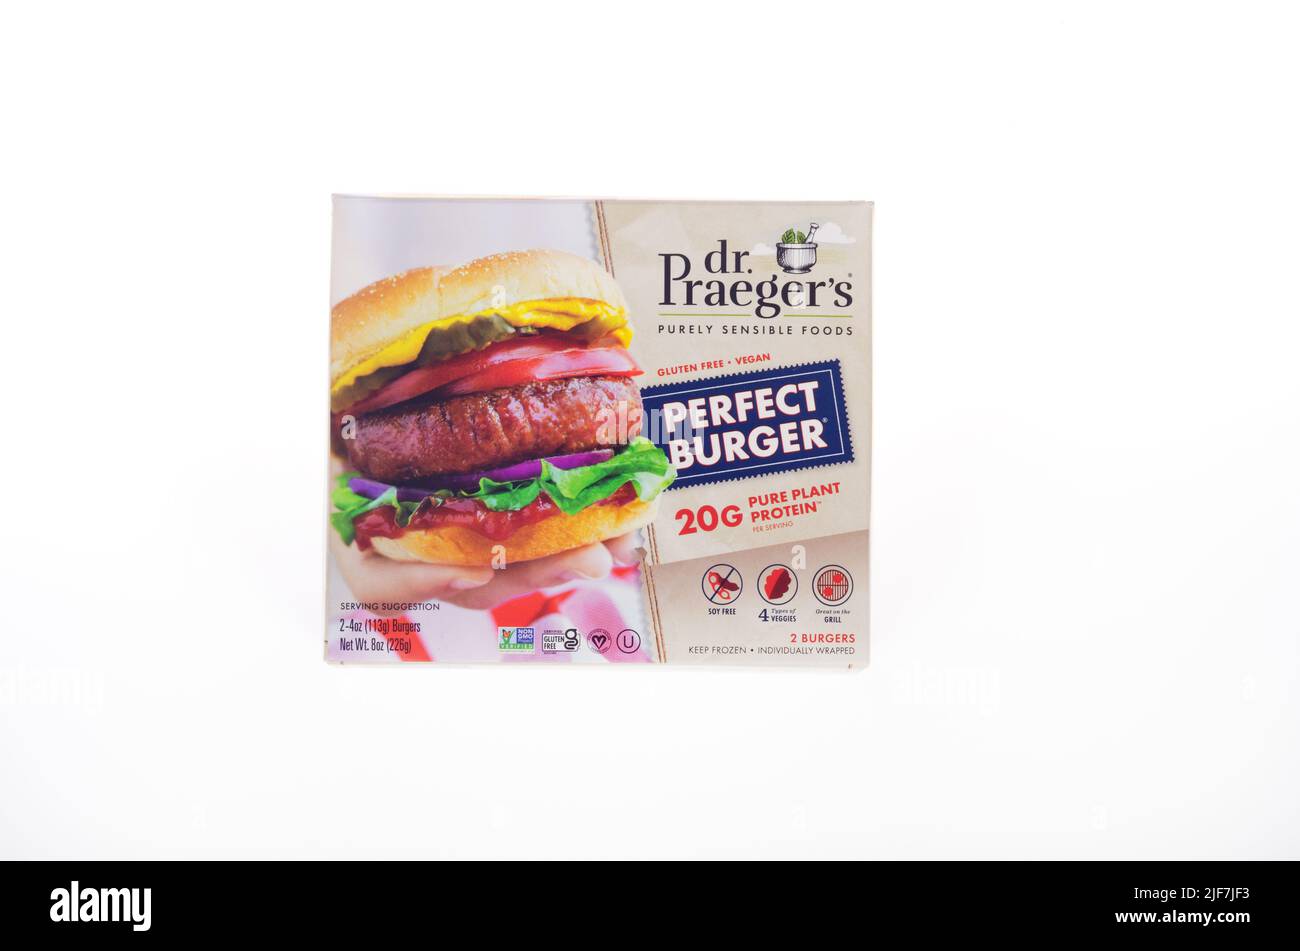 Box of Dr. Praegers Perfect Burger made gluten free, vegan, vegetarian, non-gmo, soy free and 20 grams plant protein per serving. Stock Photo